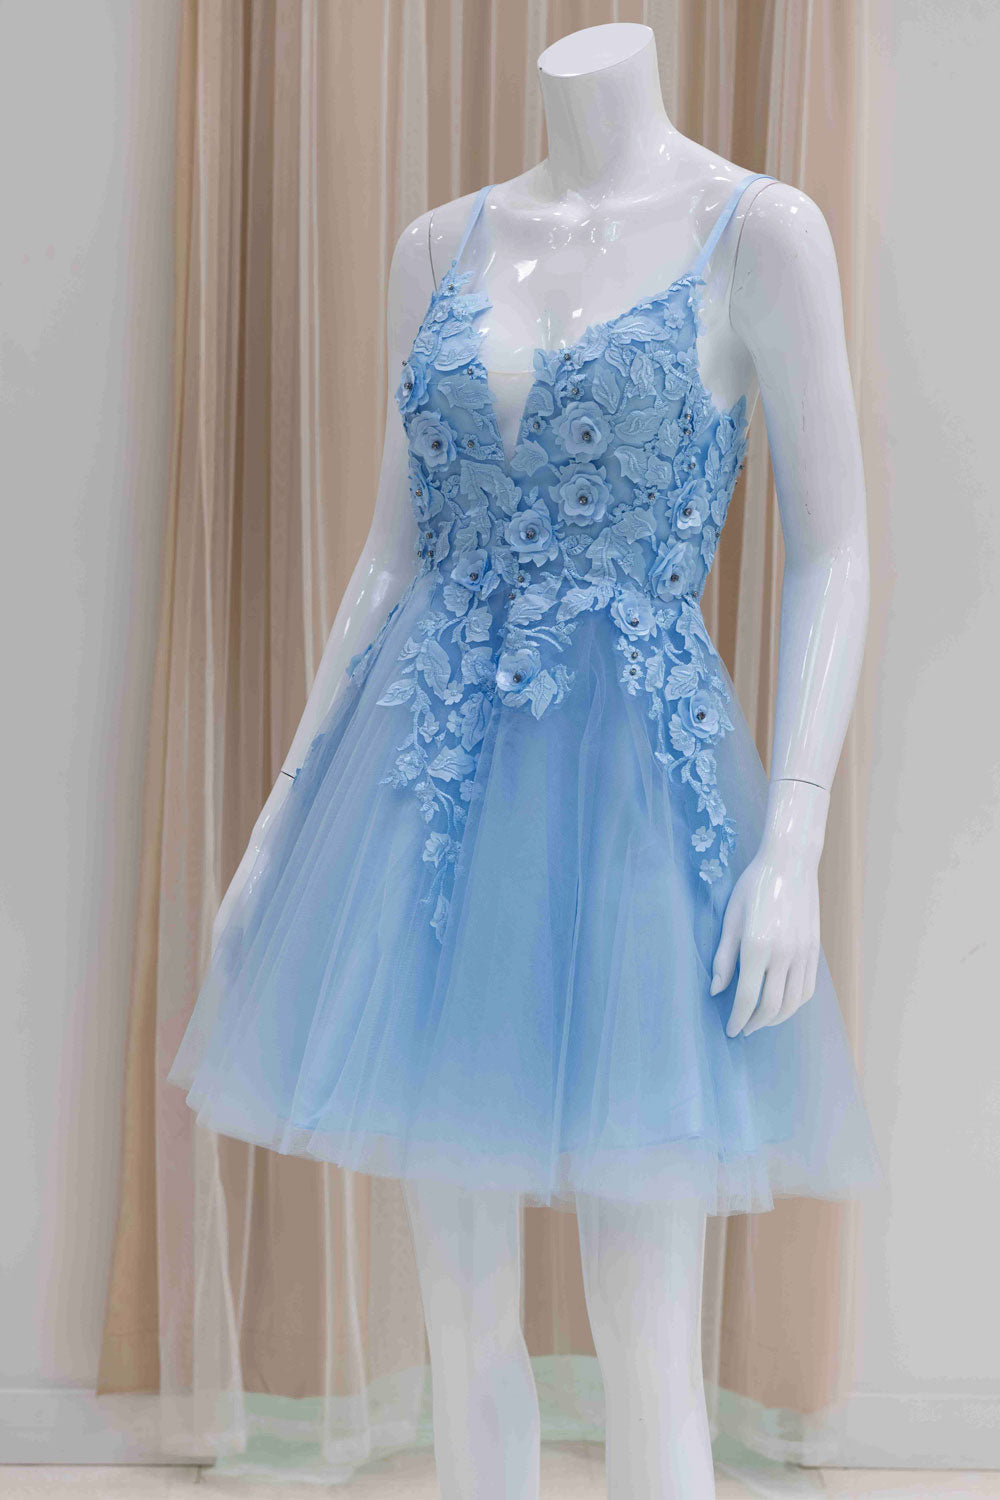 3D Flower Applique Short Fit and Flare Cocktail Dress in Baby Blue